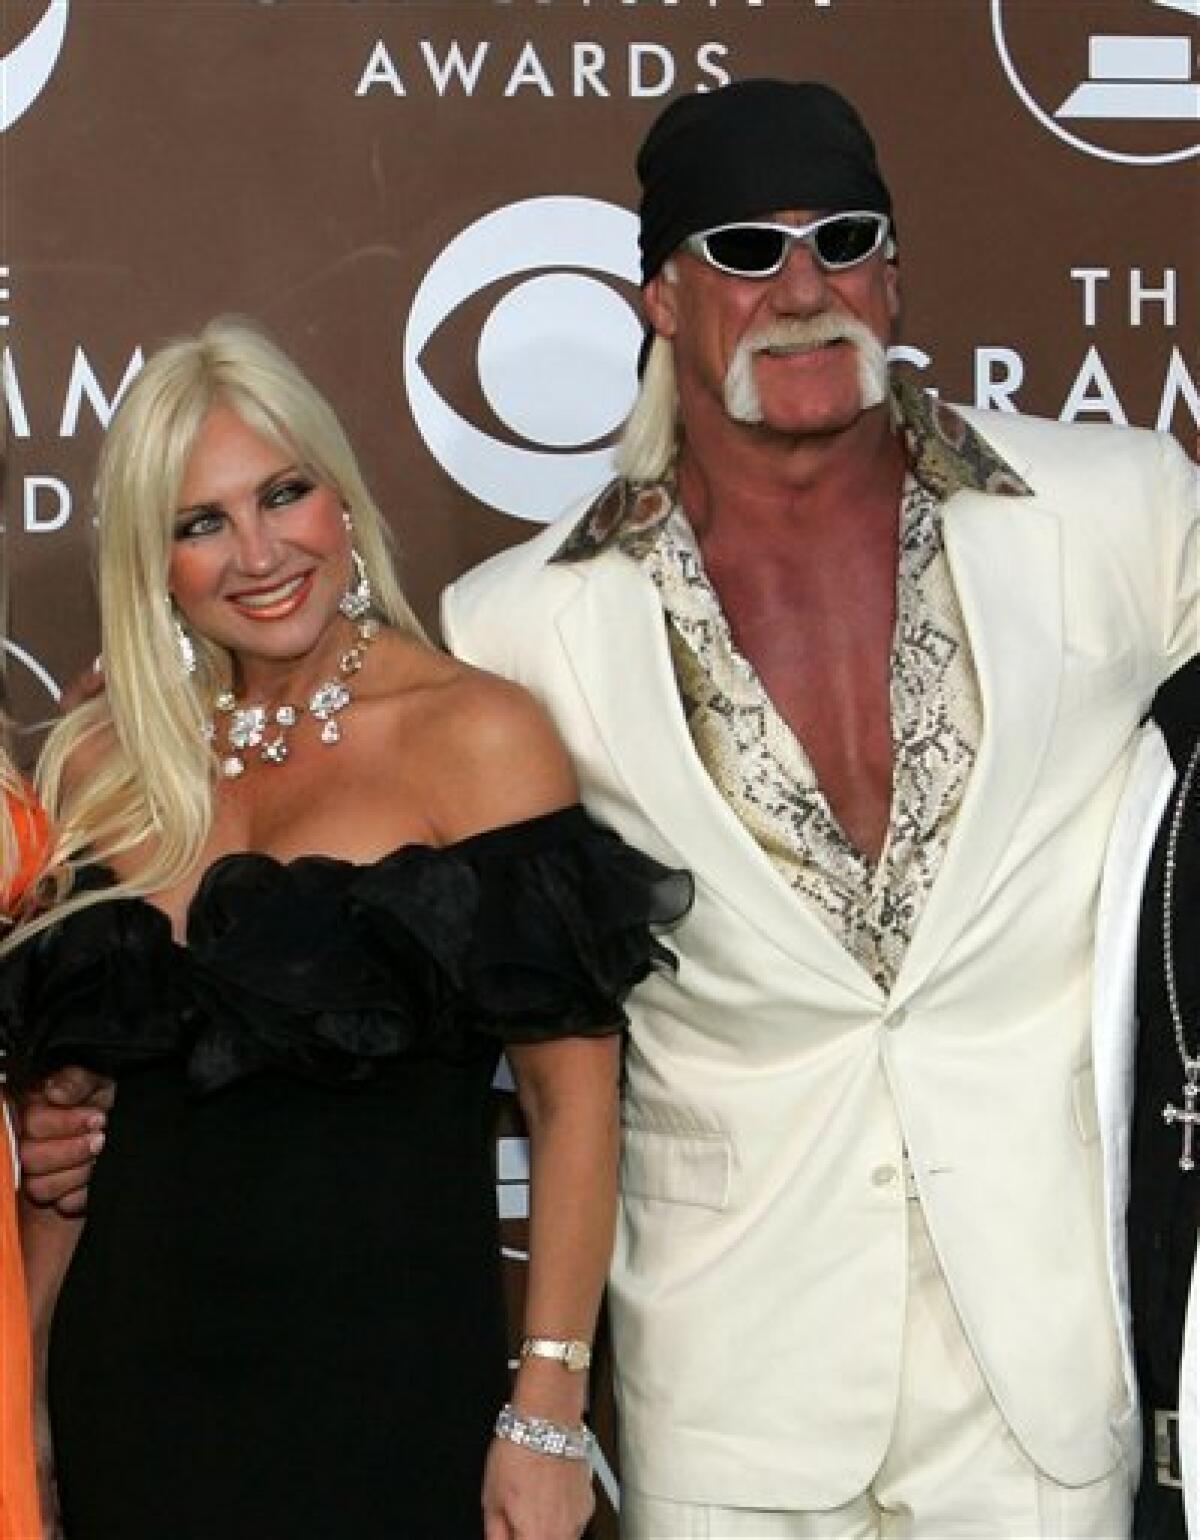 FILE - In this Feb. 8, 2006 file photo, Hulk Hogan and his wife Linda arrive at the 48th annual Grammy Awards, in Los Angeles. Hogan, whose real name is Terry Bollea, said in court in Clearwater, Fla., Tuesday, July 28, 2009 that he and his wife, Linda, have agreed to the terms of their divorce. The divorce was finalized during a brief hearing.(AP Photo/Chris Carlson, file)